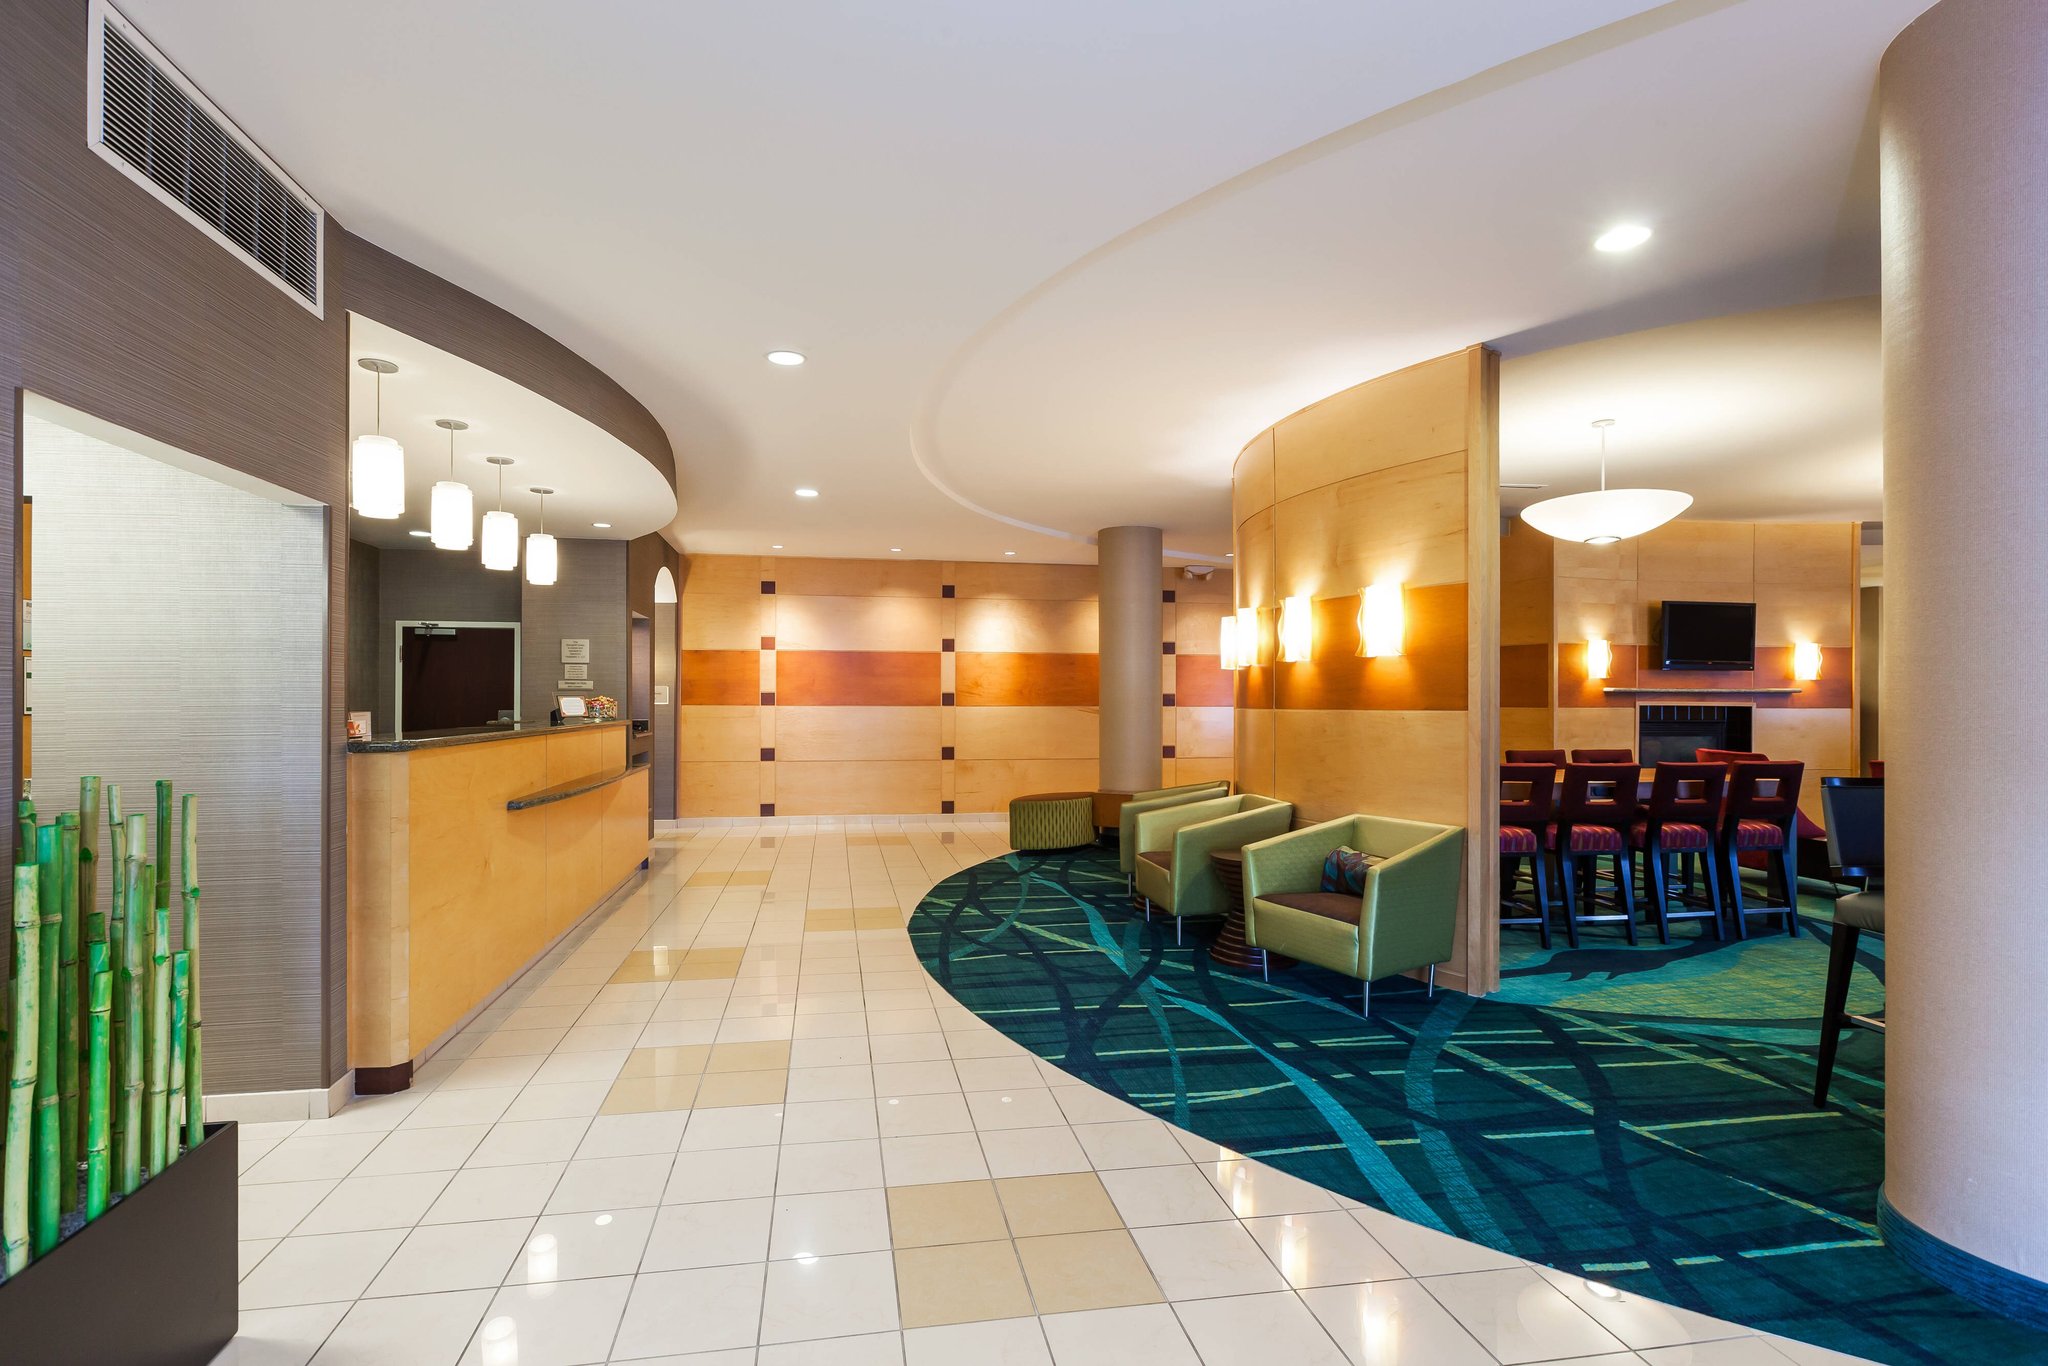 Springhill Suites Charlotte Lake Normanmooresville